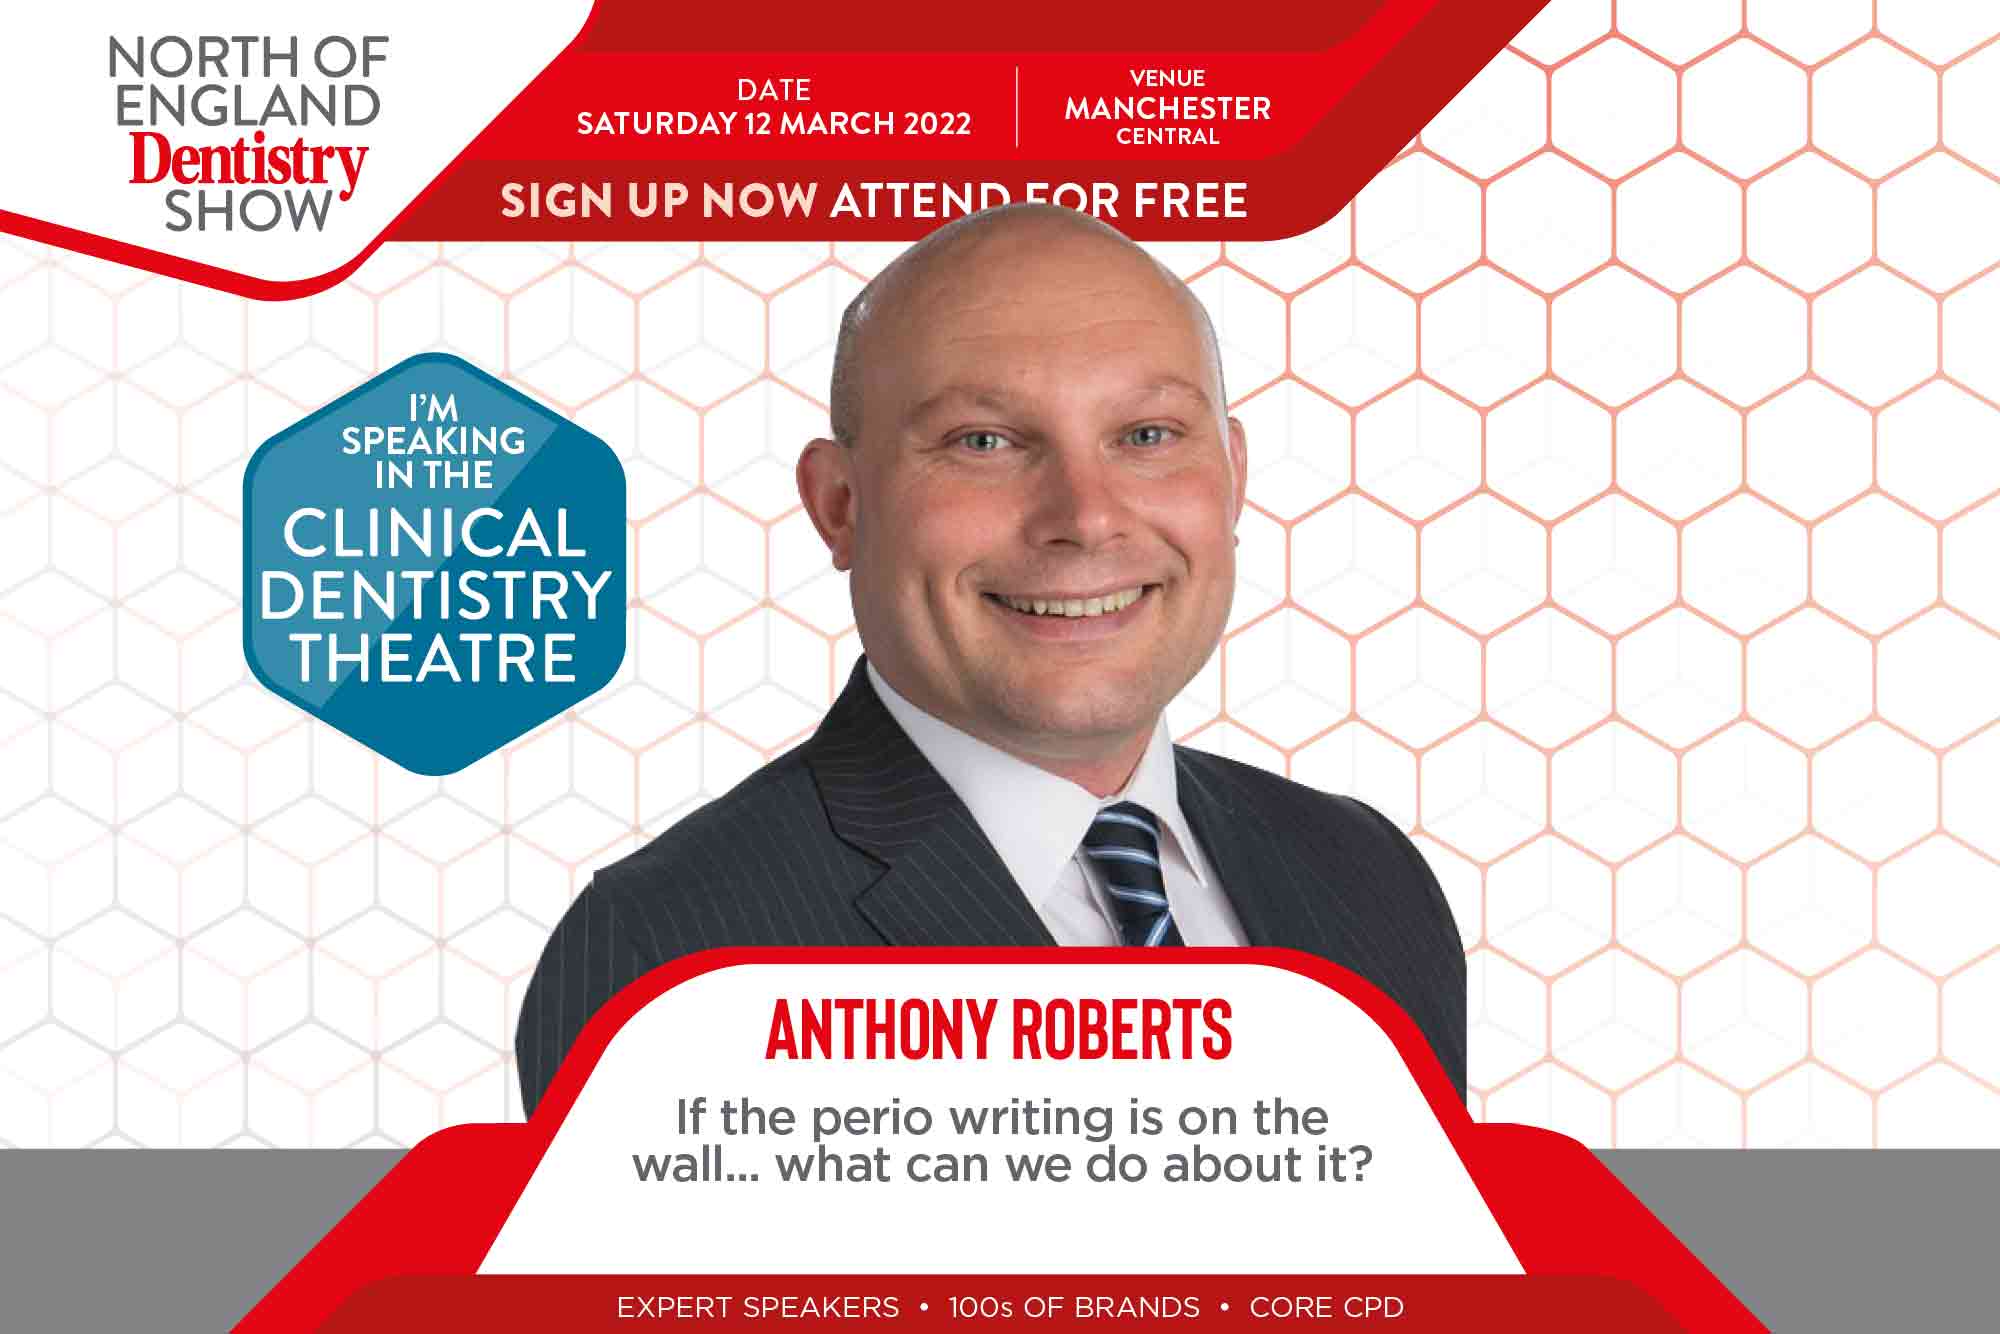 North of England Dentistry Show – Anthony Roberts on perio